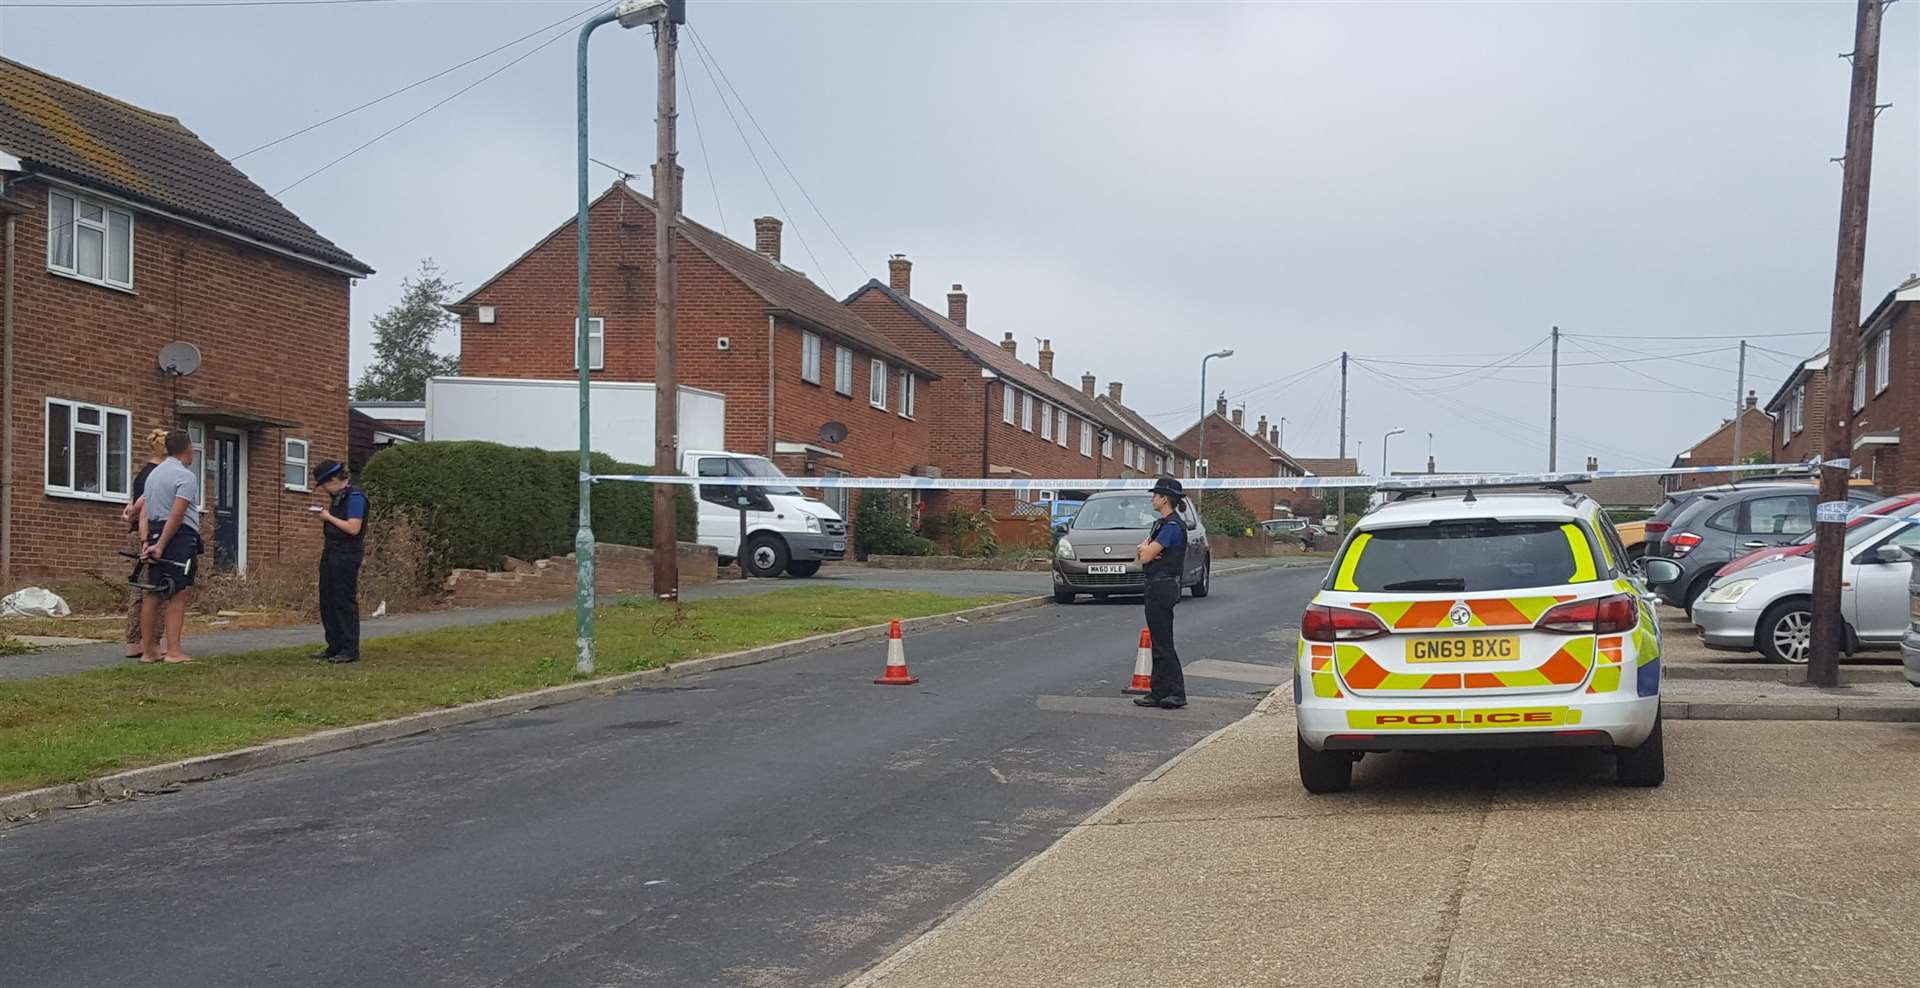 Police were seen speaking to residents in River View the morning after the attack